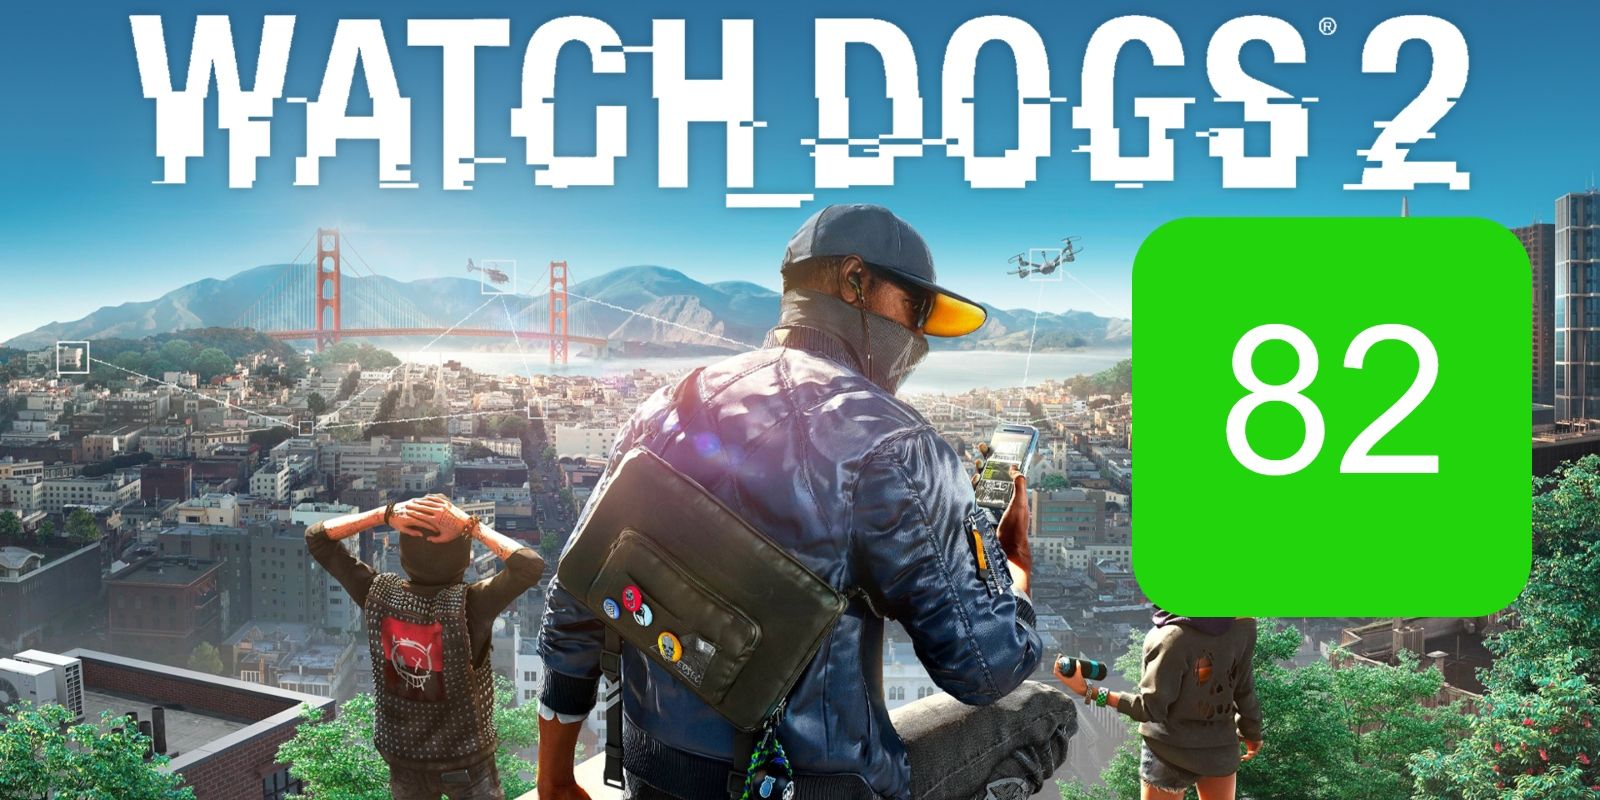 The Watch Dogs 2 Metascore for Xbox One